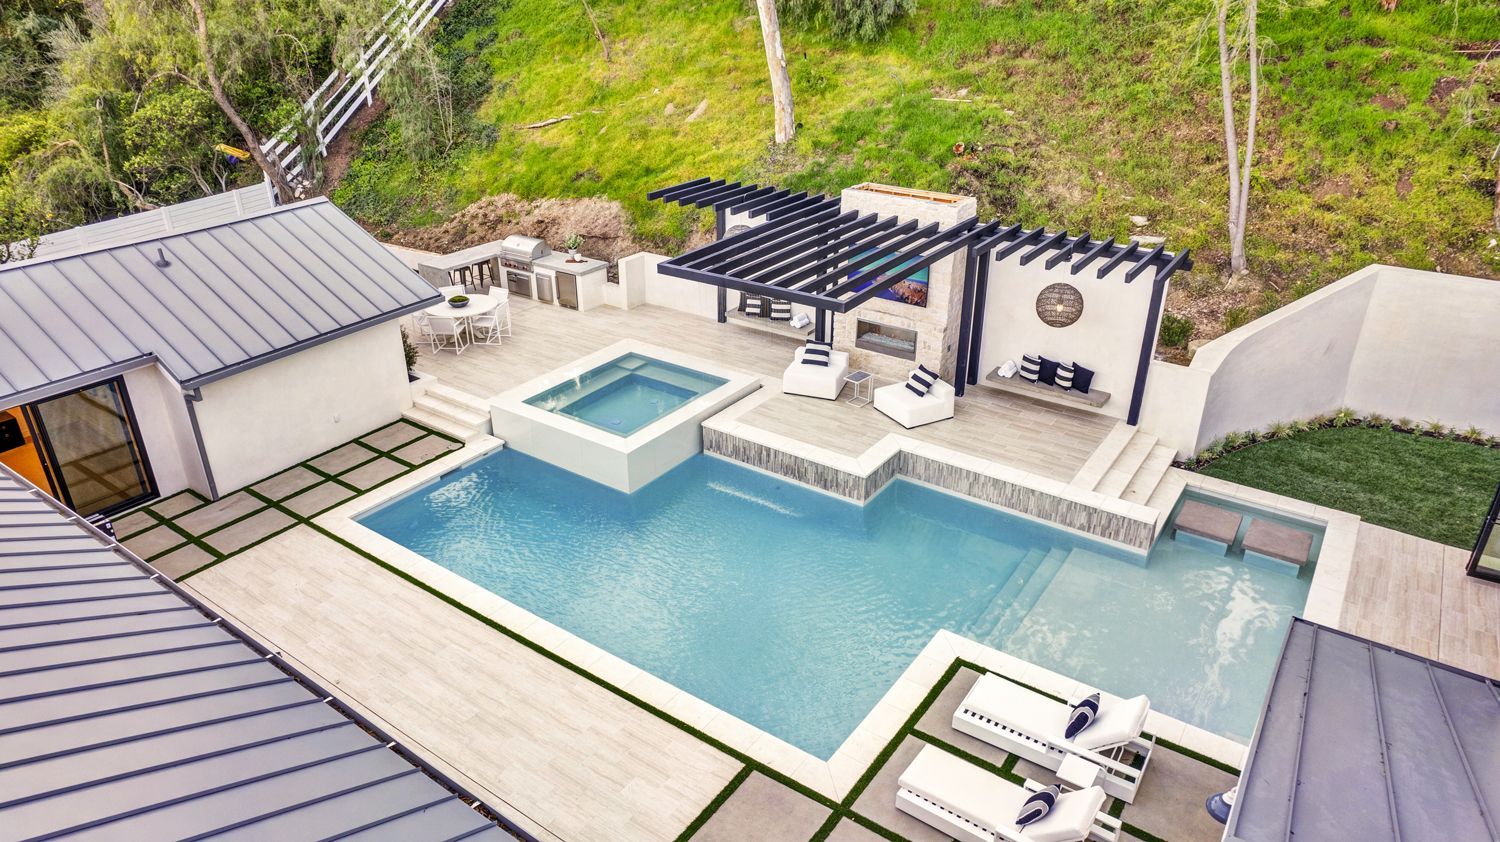 Luxury swimming pool design and construction by Westmod in Hidden Hills, CA.